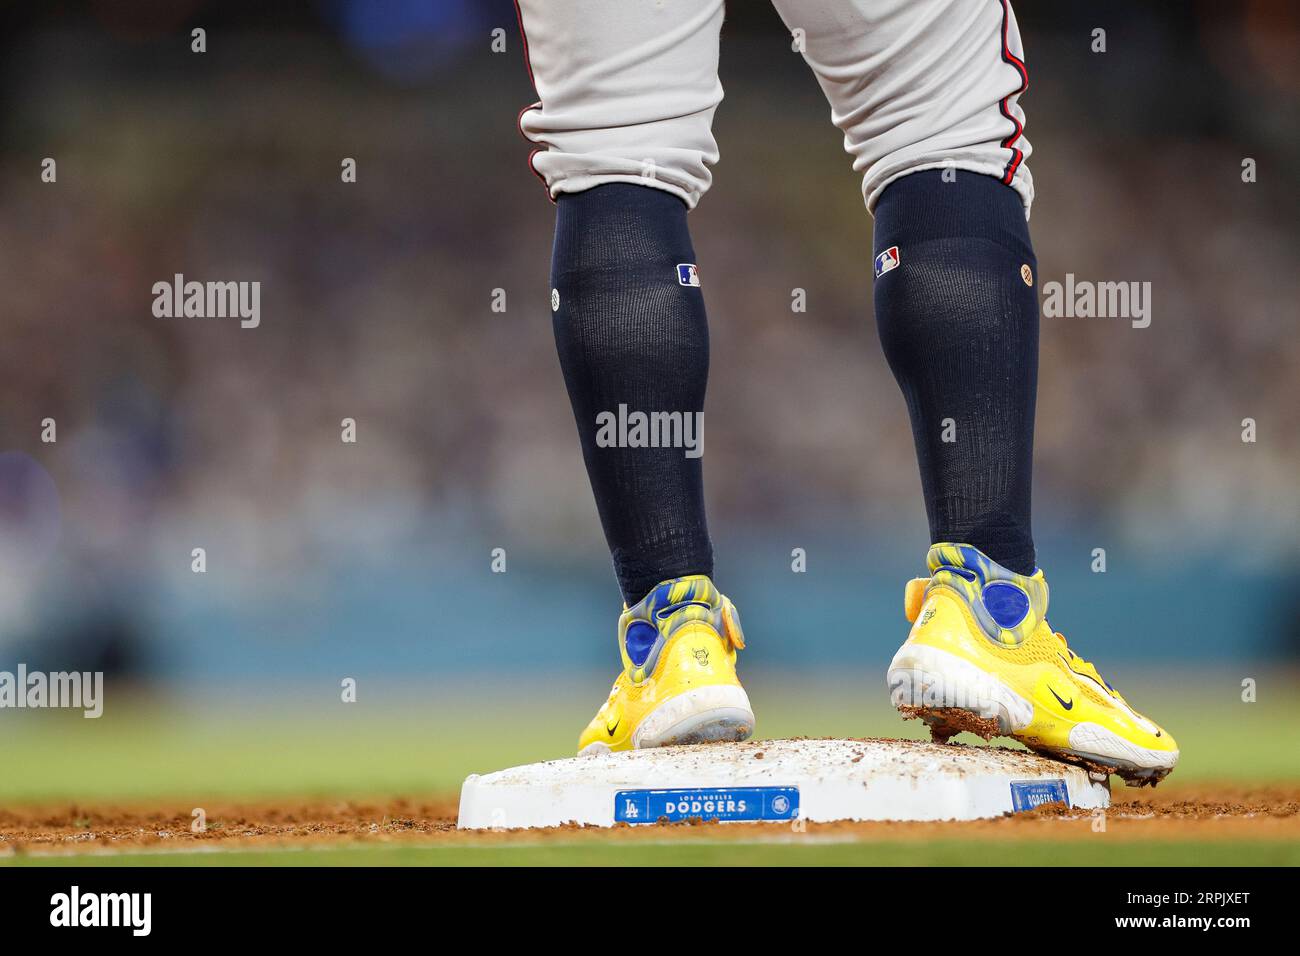 A detailed view of the Nike cleats worn by Ronald Acuna Jr. #13 of